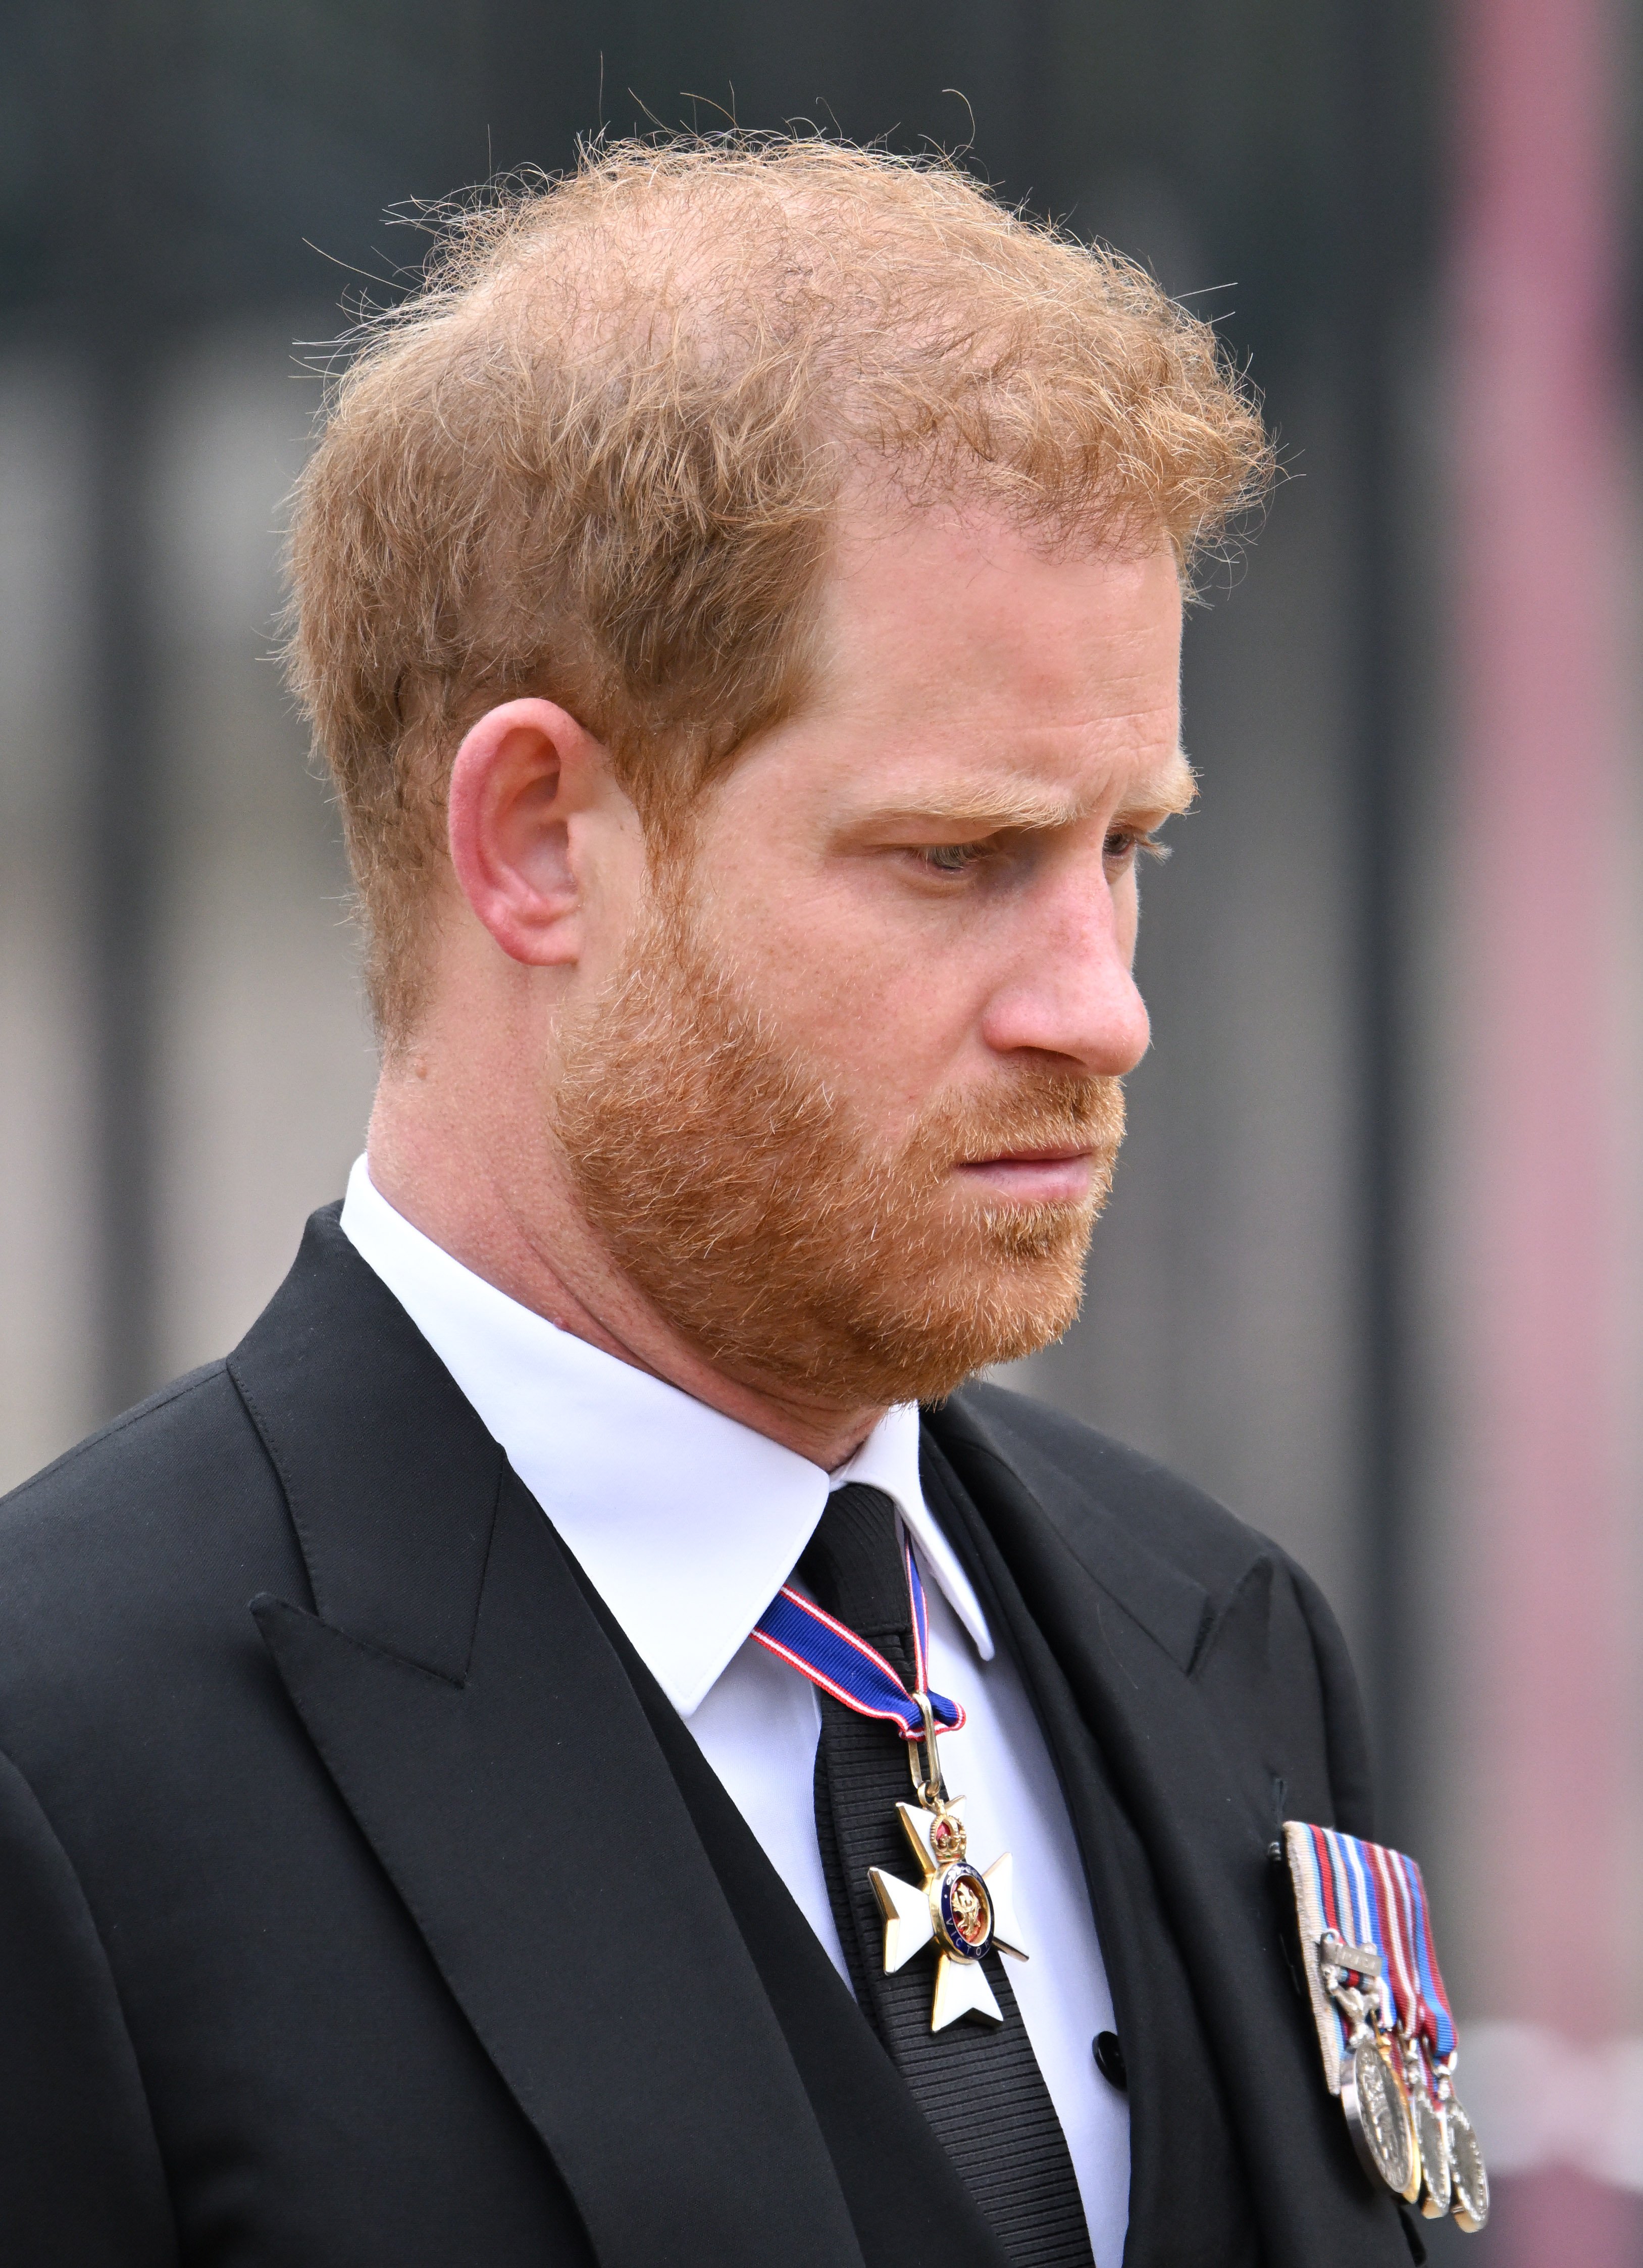 Prince Harry pictured during the state funeral of Queen Elizabeth II at Westminster Abbey on September 19, 2022 in London, England | Source: Getty Images